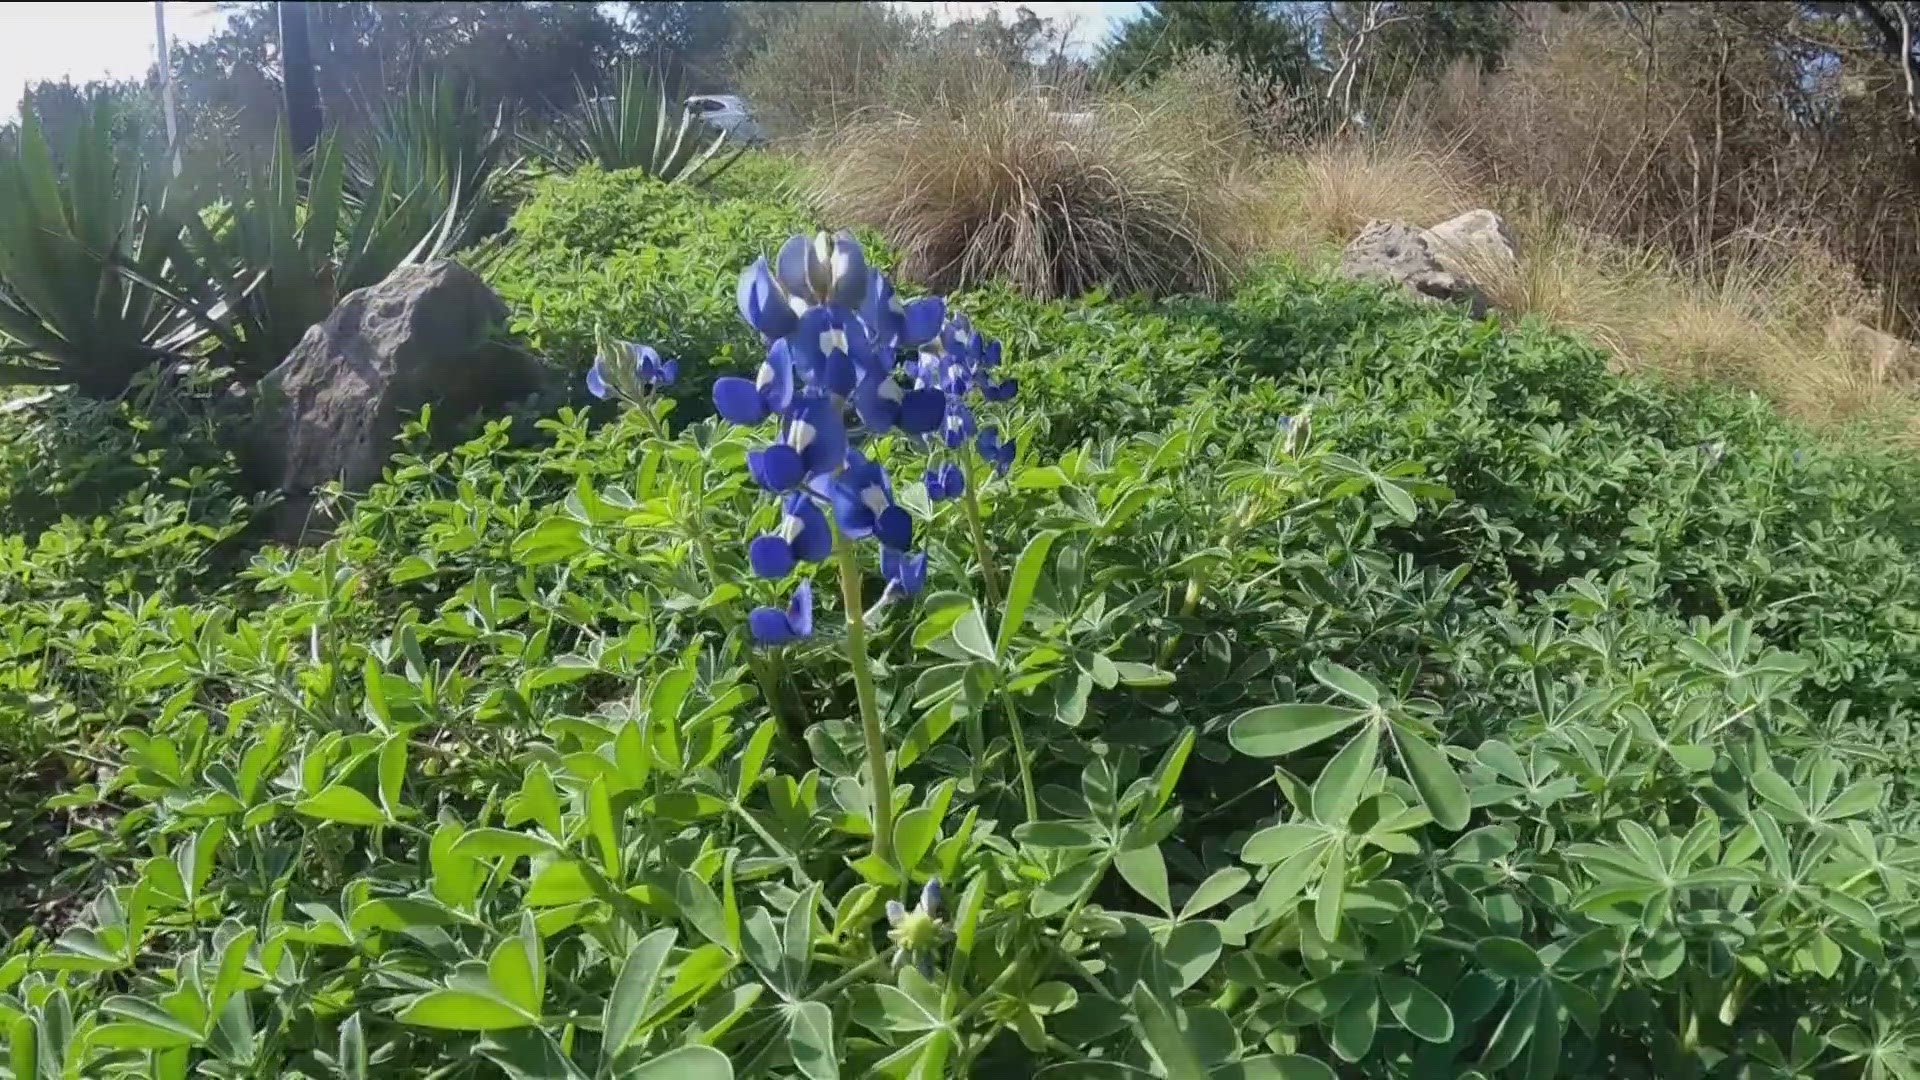 Experts say this bluebonnet season will be a good one. Meteorologist Grace Thornton explains why.